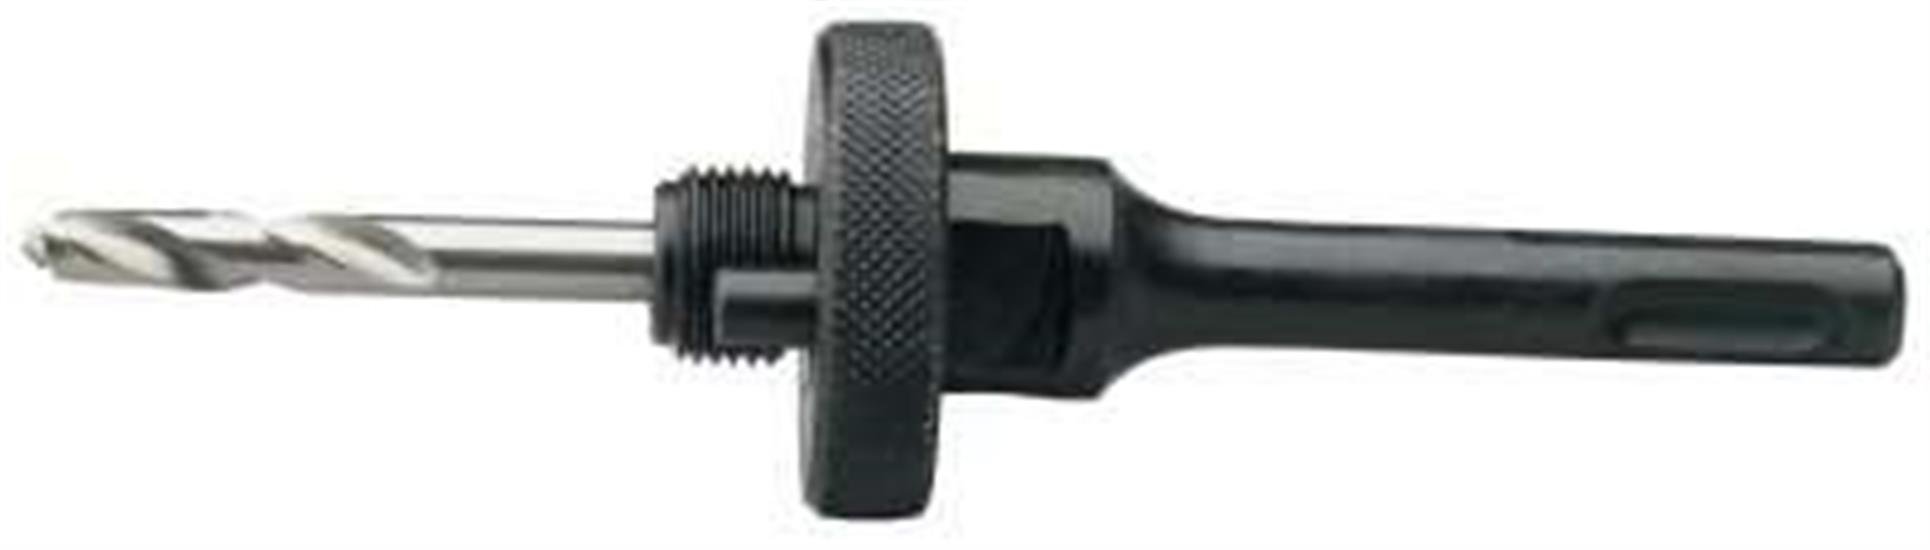 Draper 52992 (Hsa/Sds+) - Quick Release Sds+ Shank Arbor For Use With Hs Holesaws 32mm - 150mm